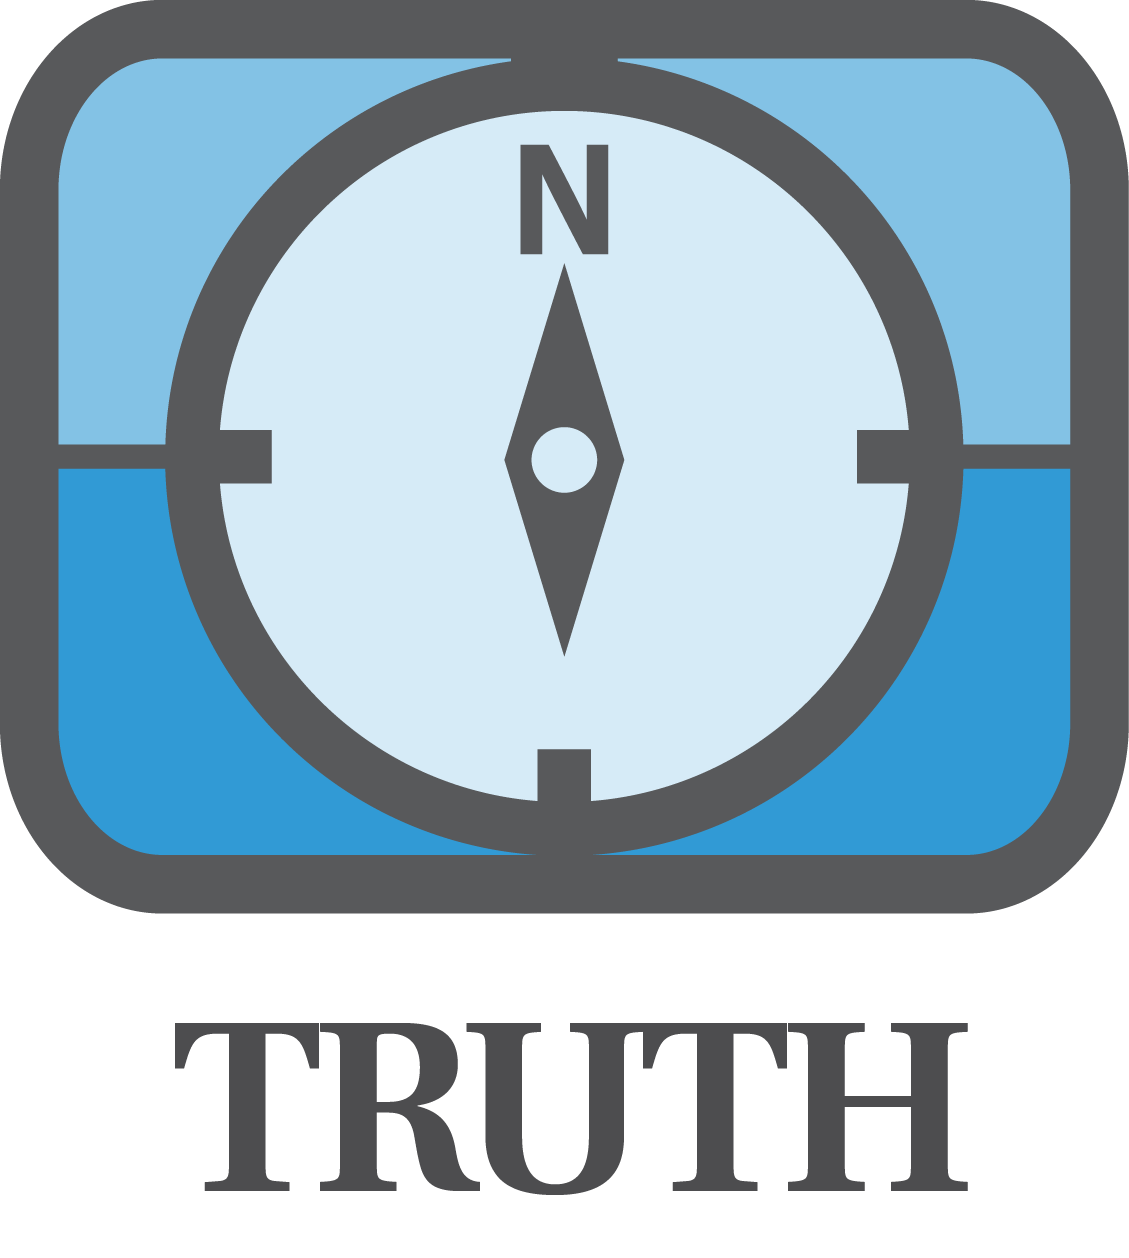 Icon of a compass representing "truth".